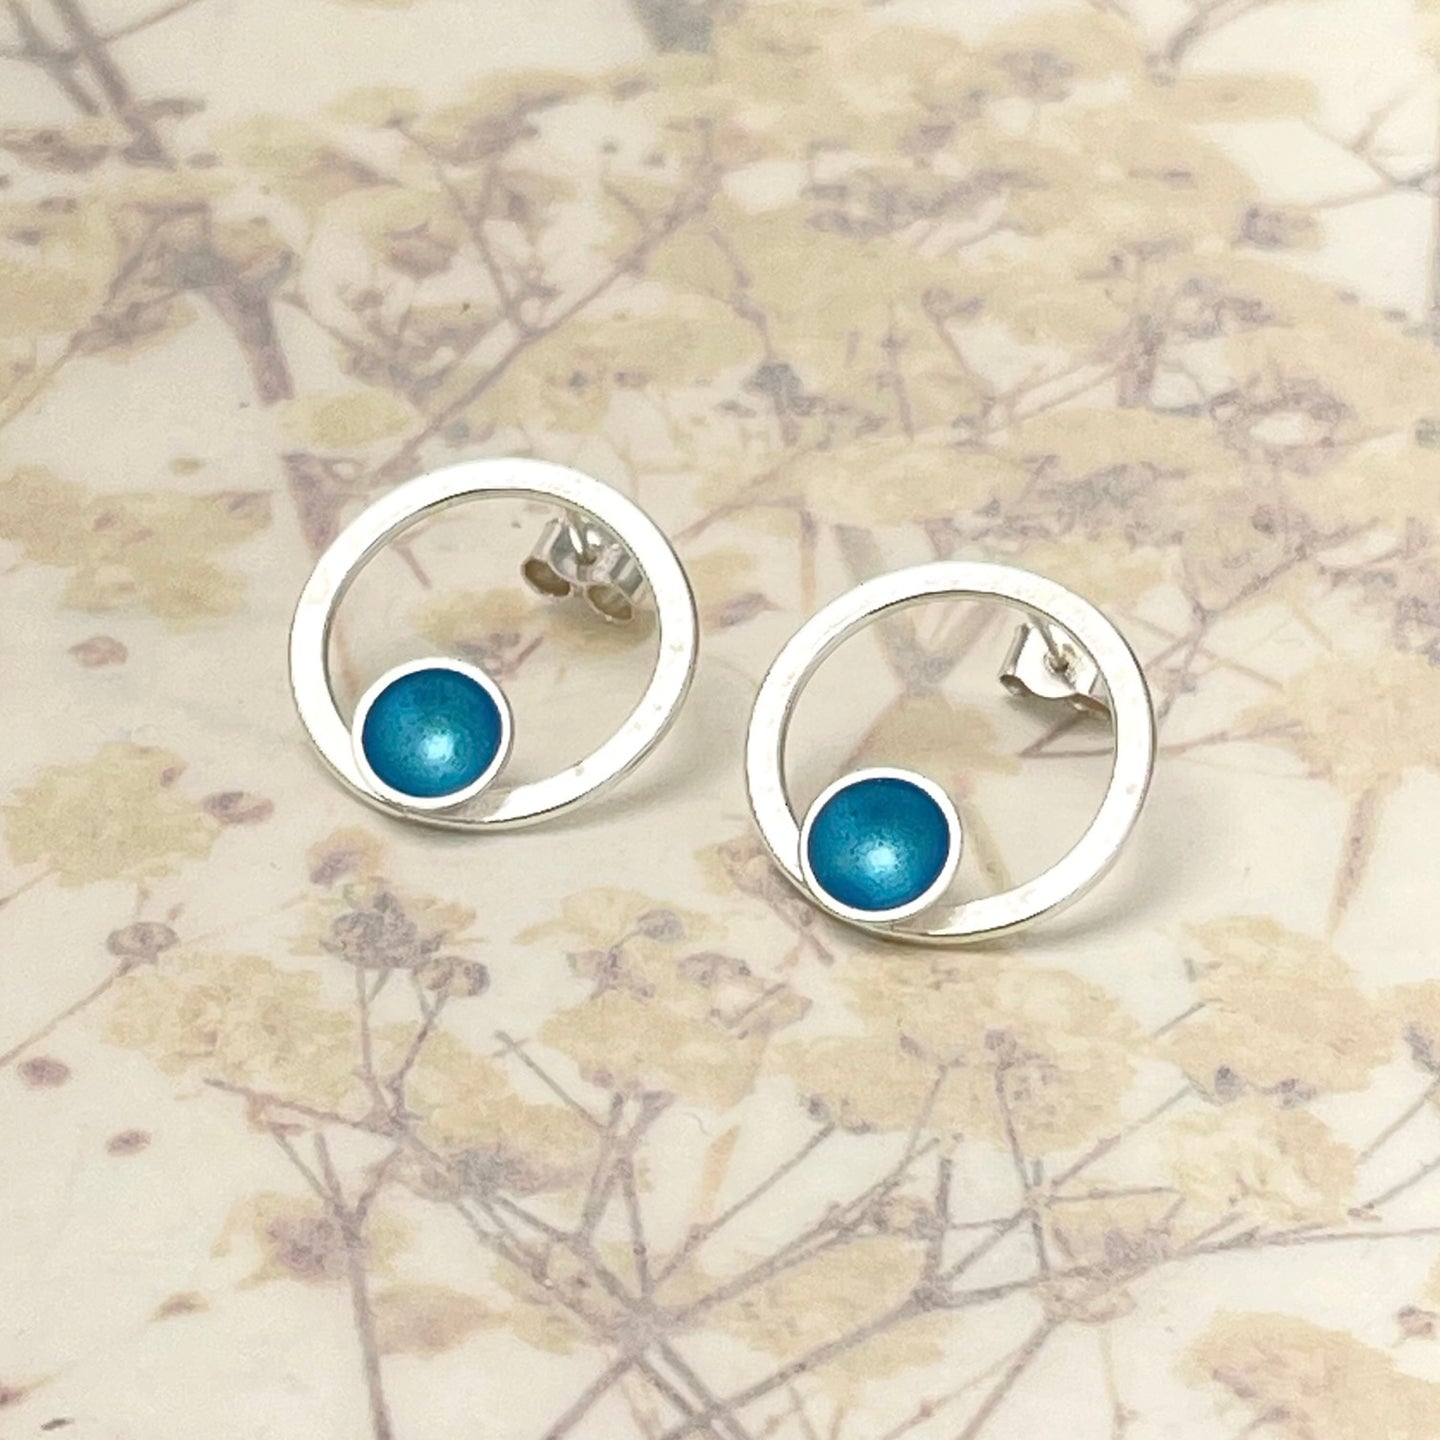 Silver and turquoise studs